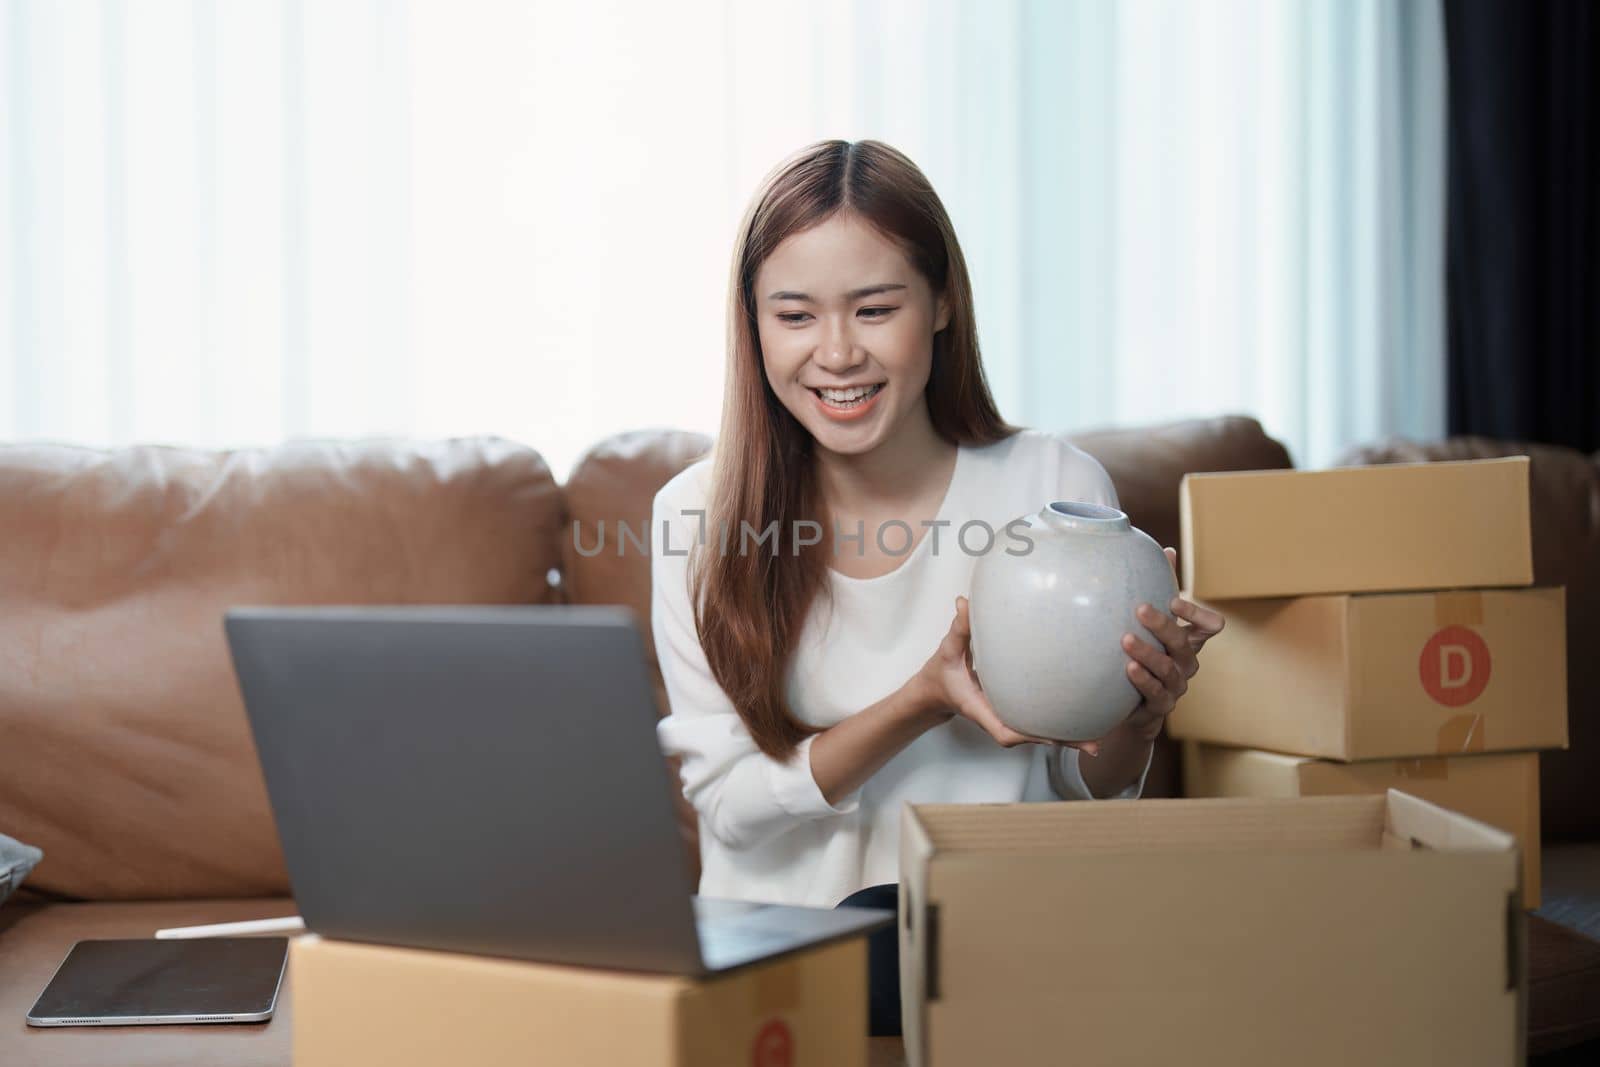 Starting small business entrepreneur of independent young Asian woman online seller using a computer showing products to a customer before making a purchase decision. SME delivery concept.